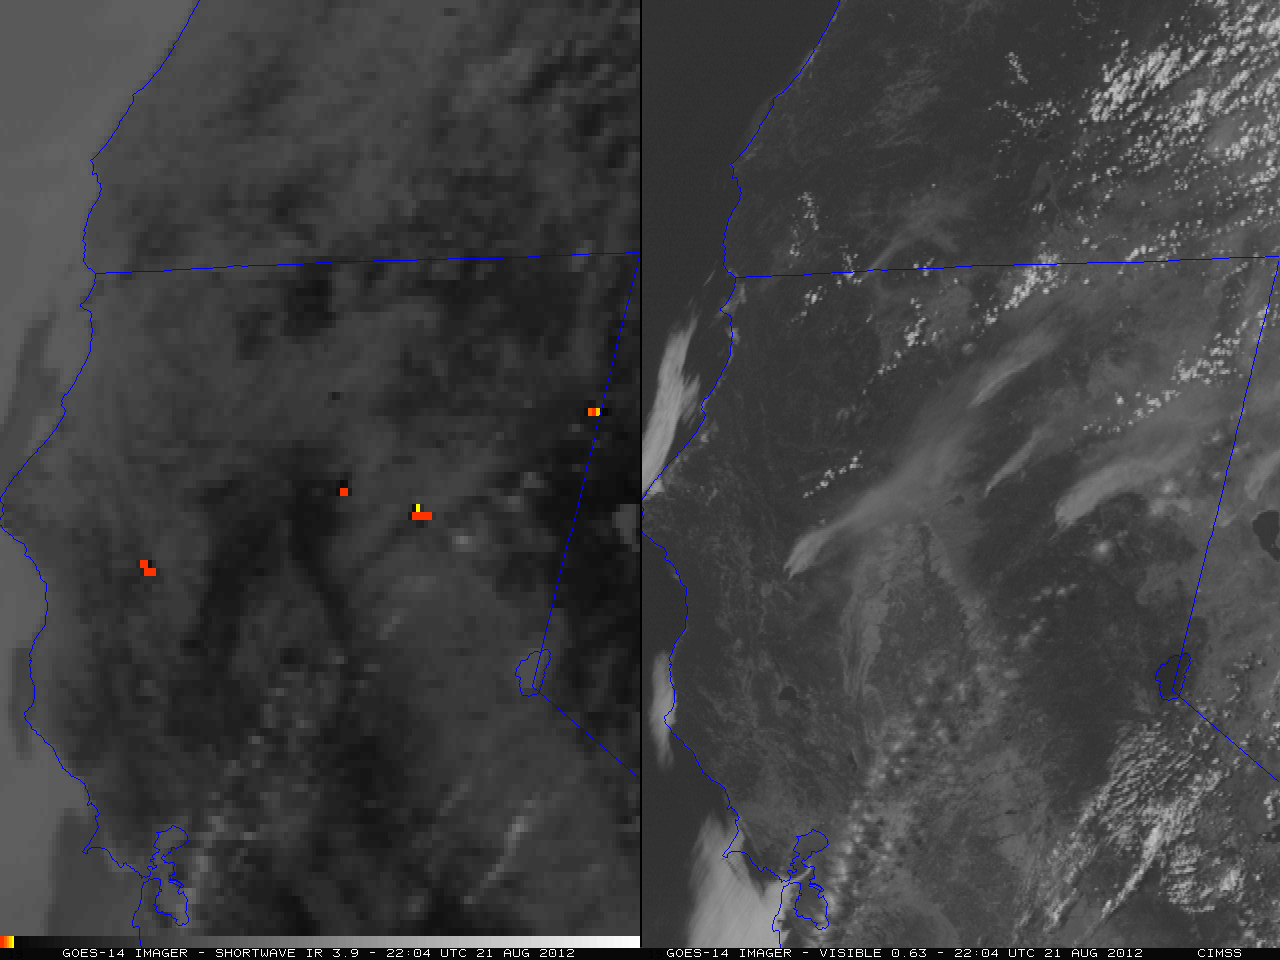 GOES-14 3.9 Âµm shortwave IR (left) and 0.63 Âµm visible (right) images (click image to play animation)